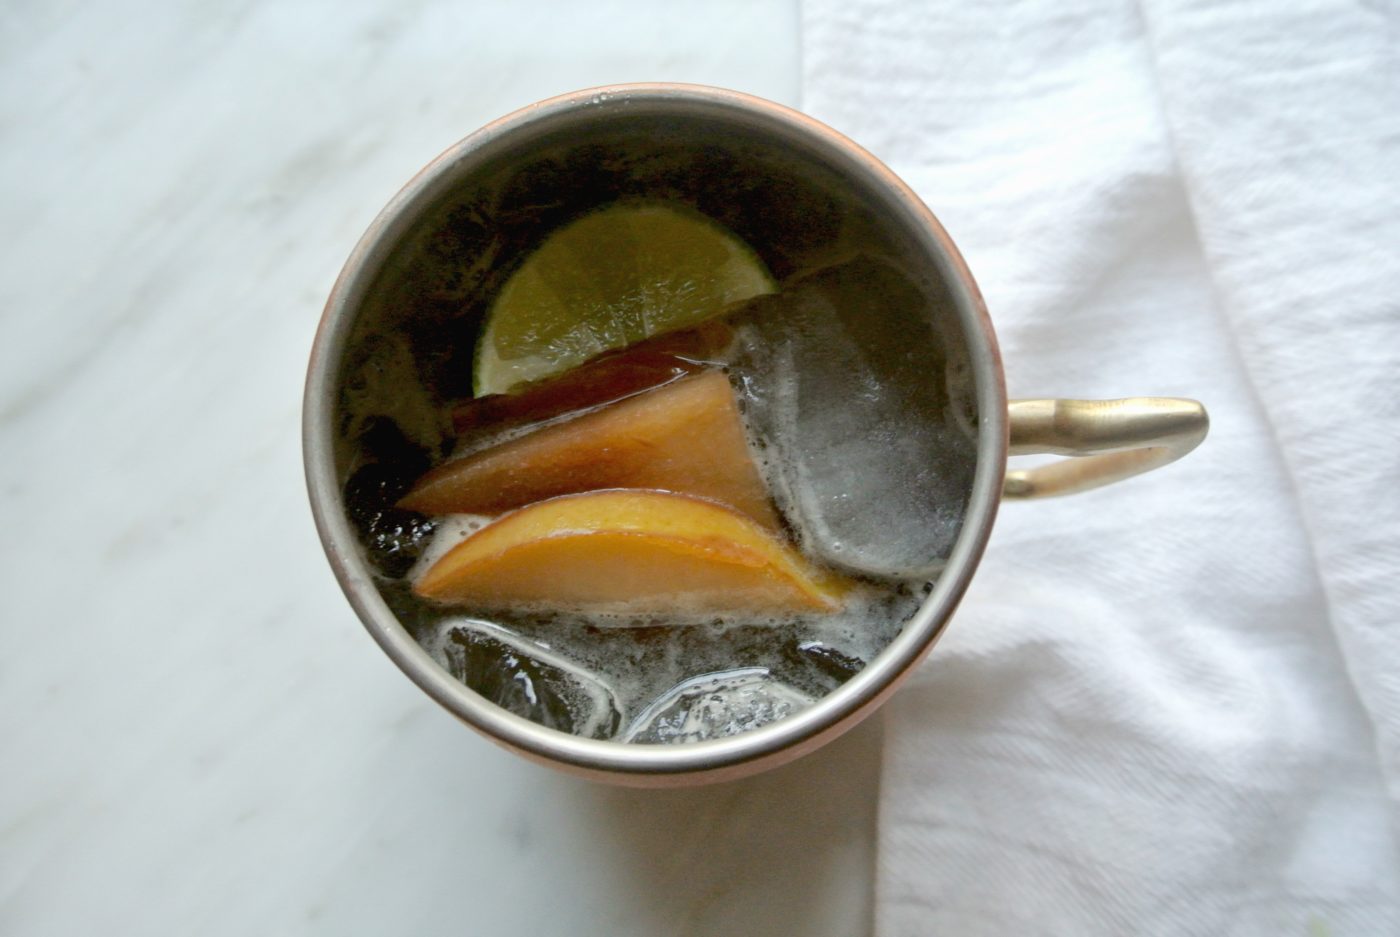 Garnishing your pear Moscow mules with pears from the vodka infusion makes the drink pretty but it's also really tasty.